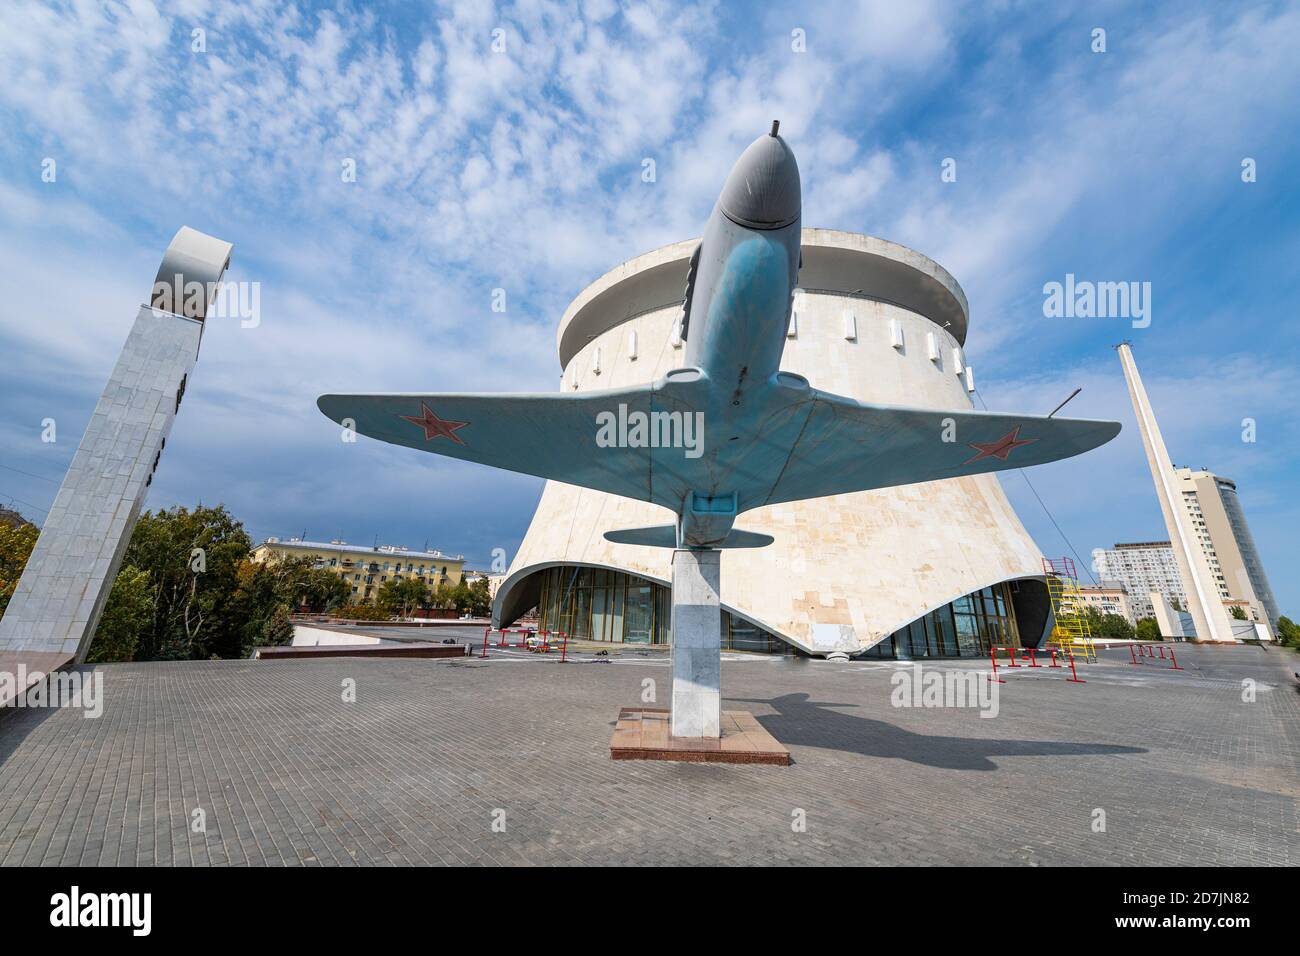 Russia, Volgograd Oblast, Volgograd, Old military airplane displayed at State Historical and Memorial Preserve Battle of Stalingrad Stock Photo